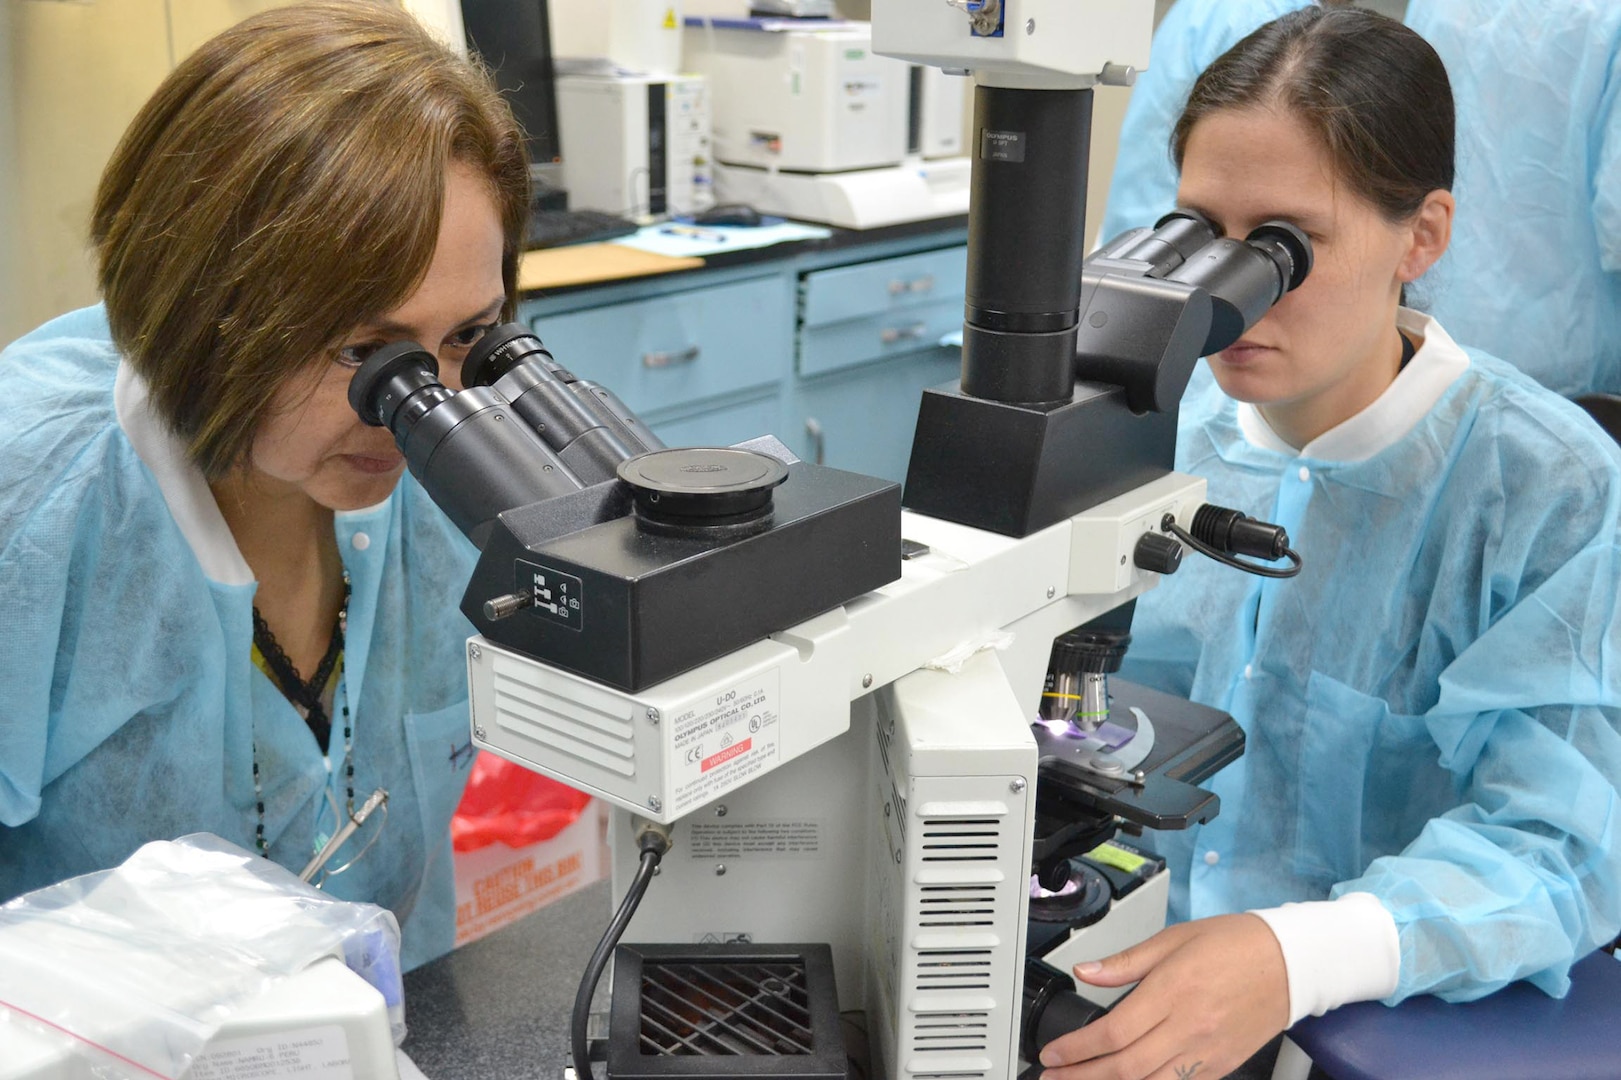 Navy Lt. Kimberly Edgel (right) and Carmen Lucas examine a positive malaria blood smear at U.S. Naval Medical Research Unit, or NAMRU, 6 in Callao, Peru. NAMRU-6 studies malaria infection, diagnosis and treatment and is the only U.S. command in South America. 